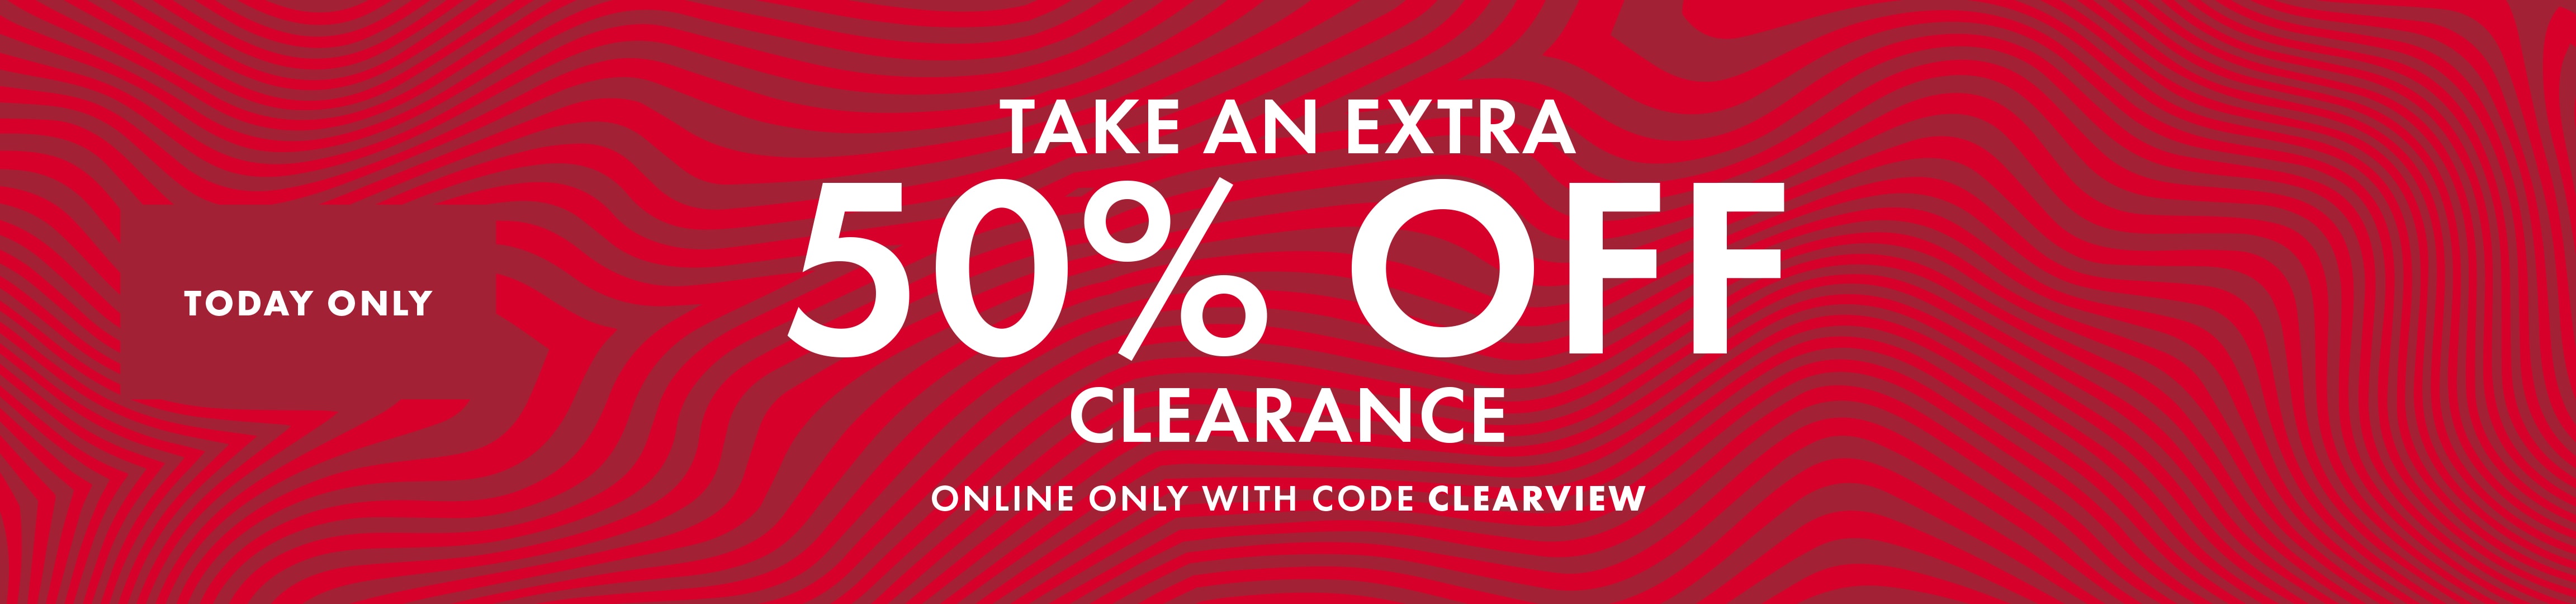 Take an extra 50% off clearance online only with code CLEARVIEW. Today only! Click to shop.